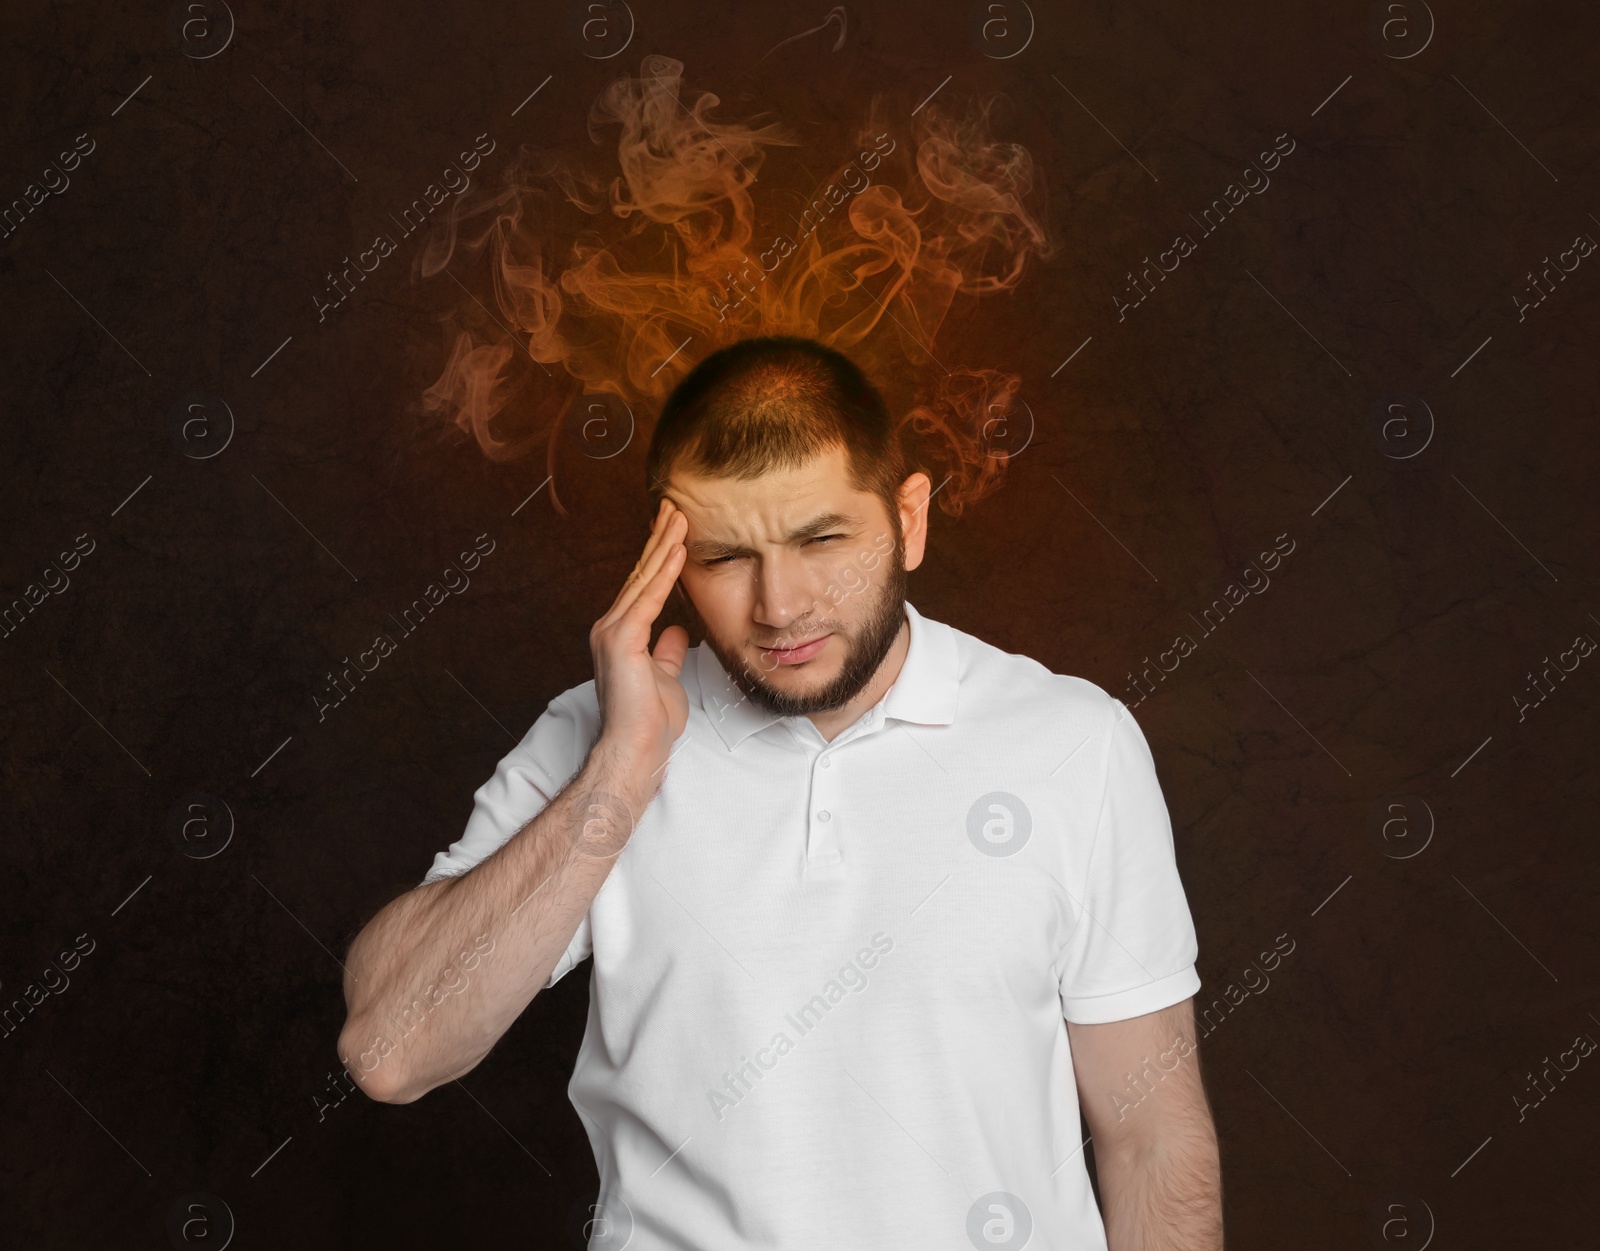 Image of Man having headache on brown background. Illustration of fire representing severe pain